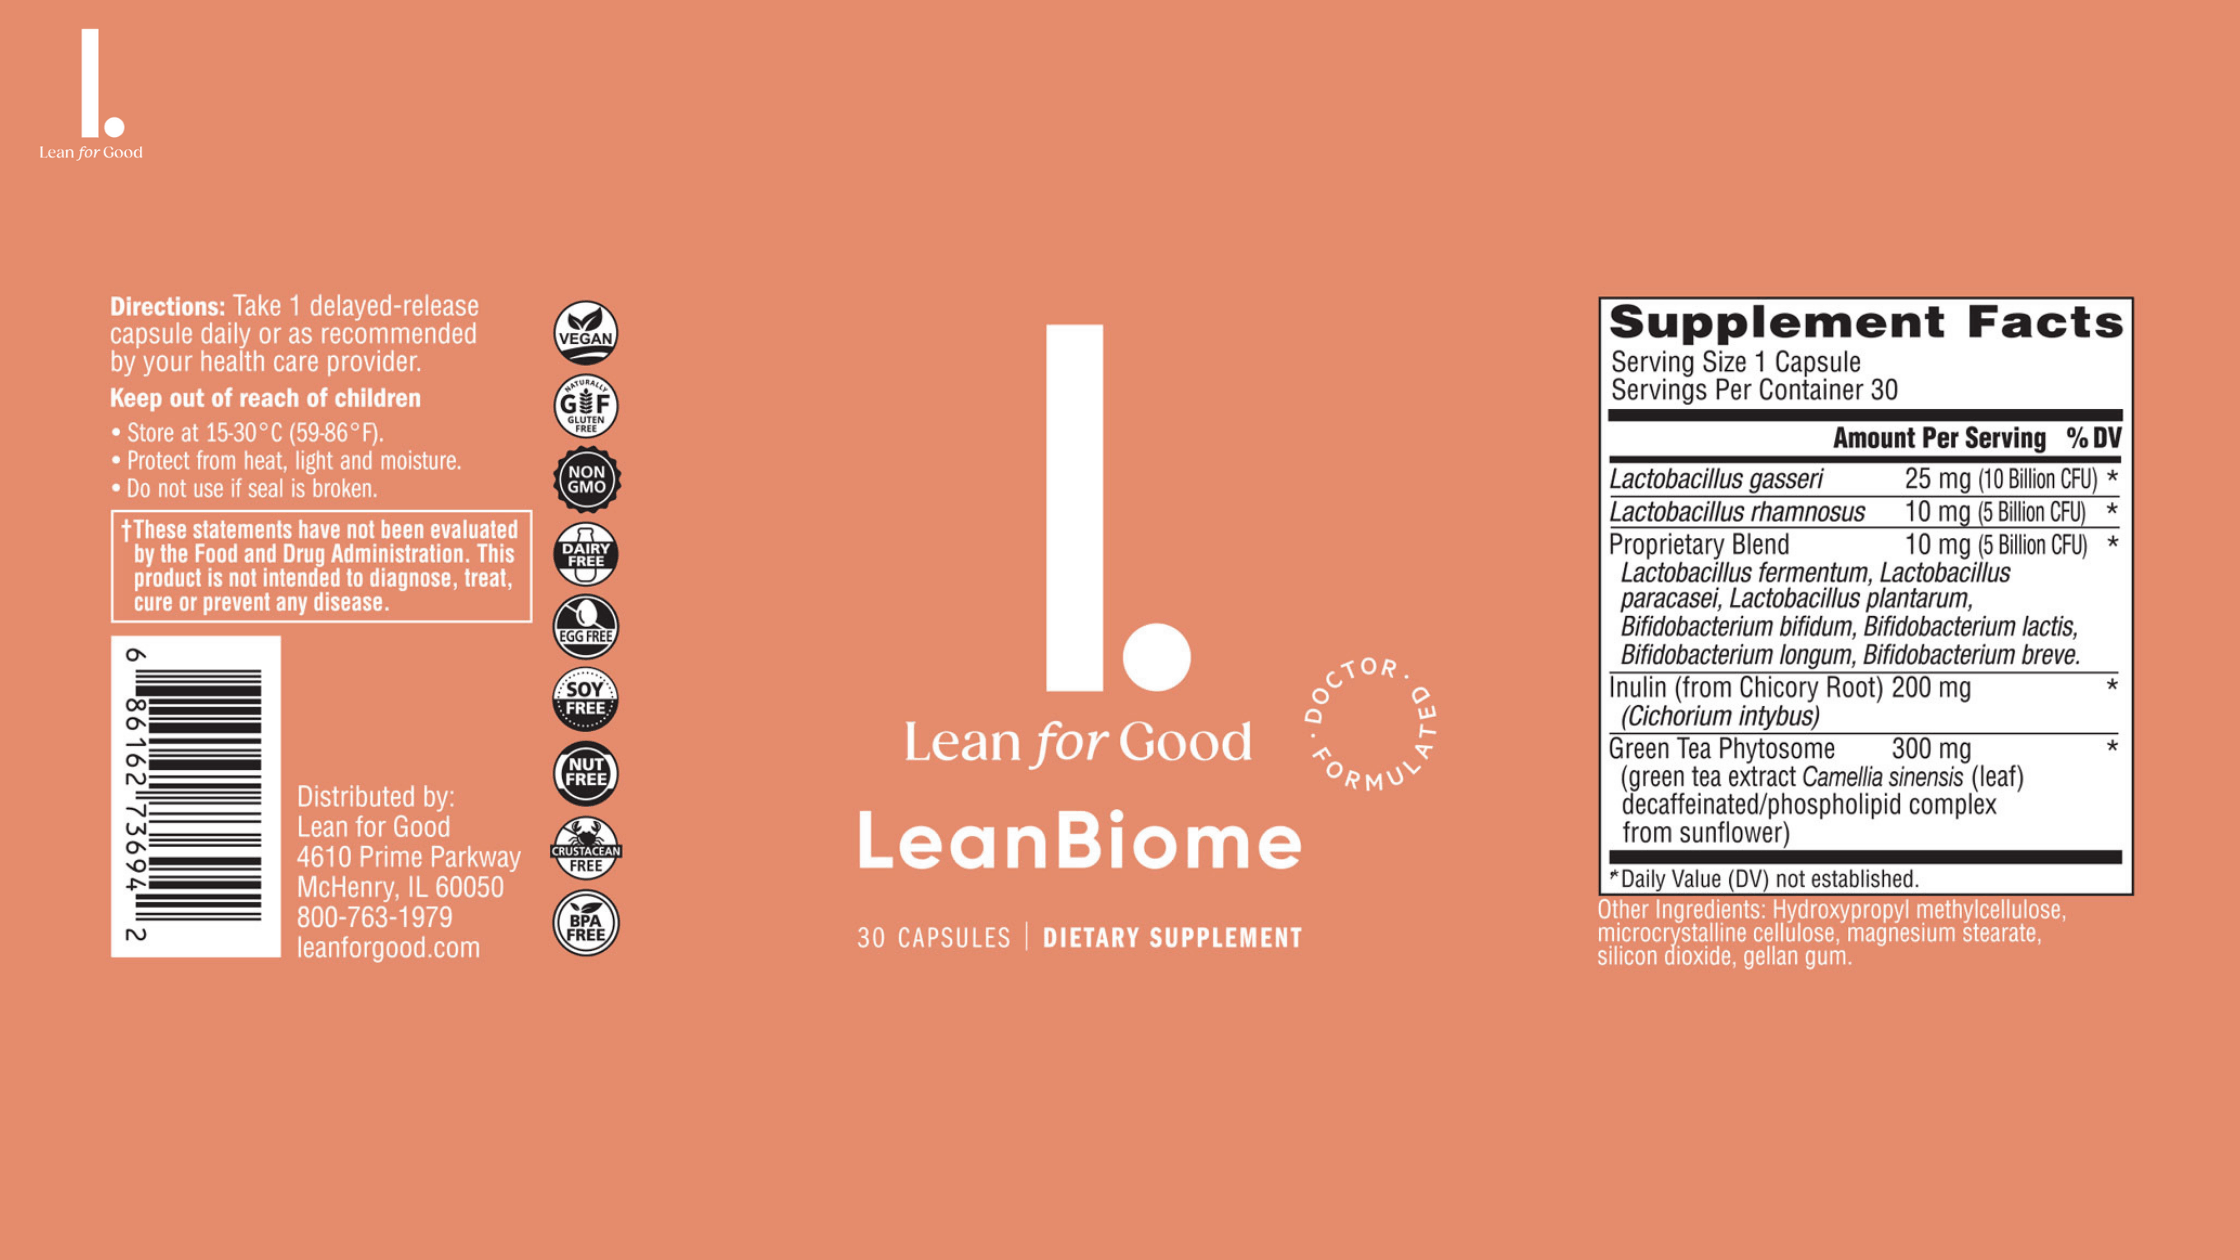 LeanBiome supplement facts